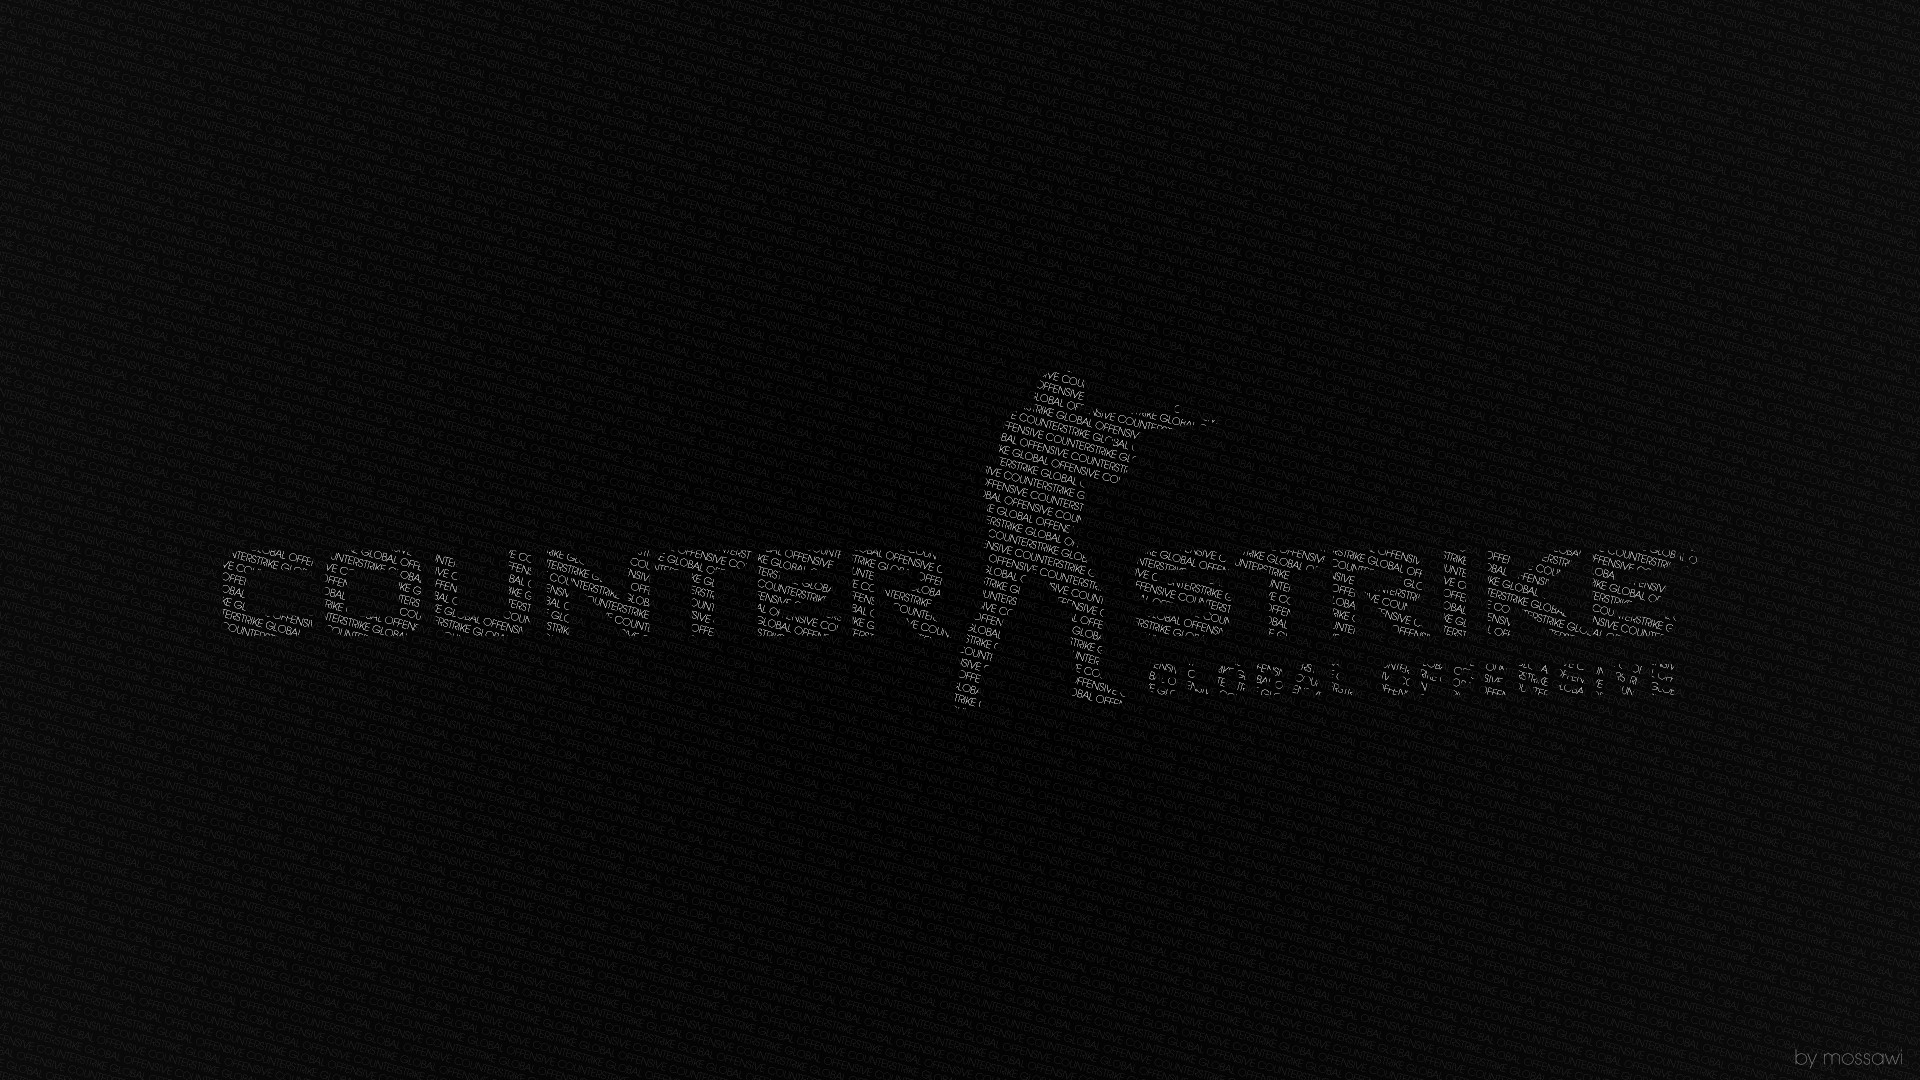 CSGO Wallpapers – Counter strike Global Offensive HD wallpapers made by the CSGO community